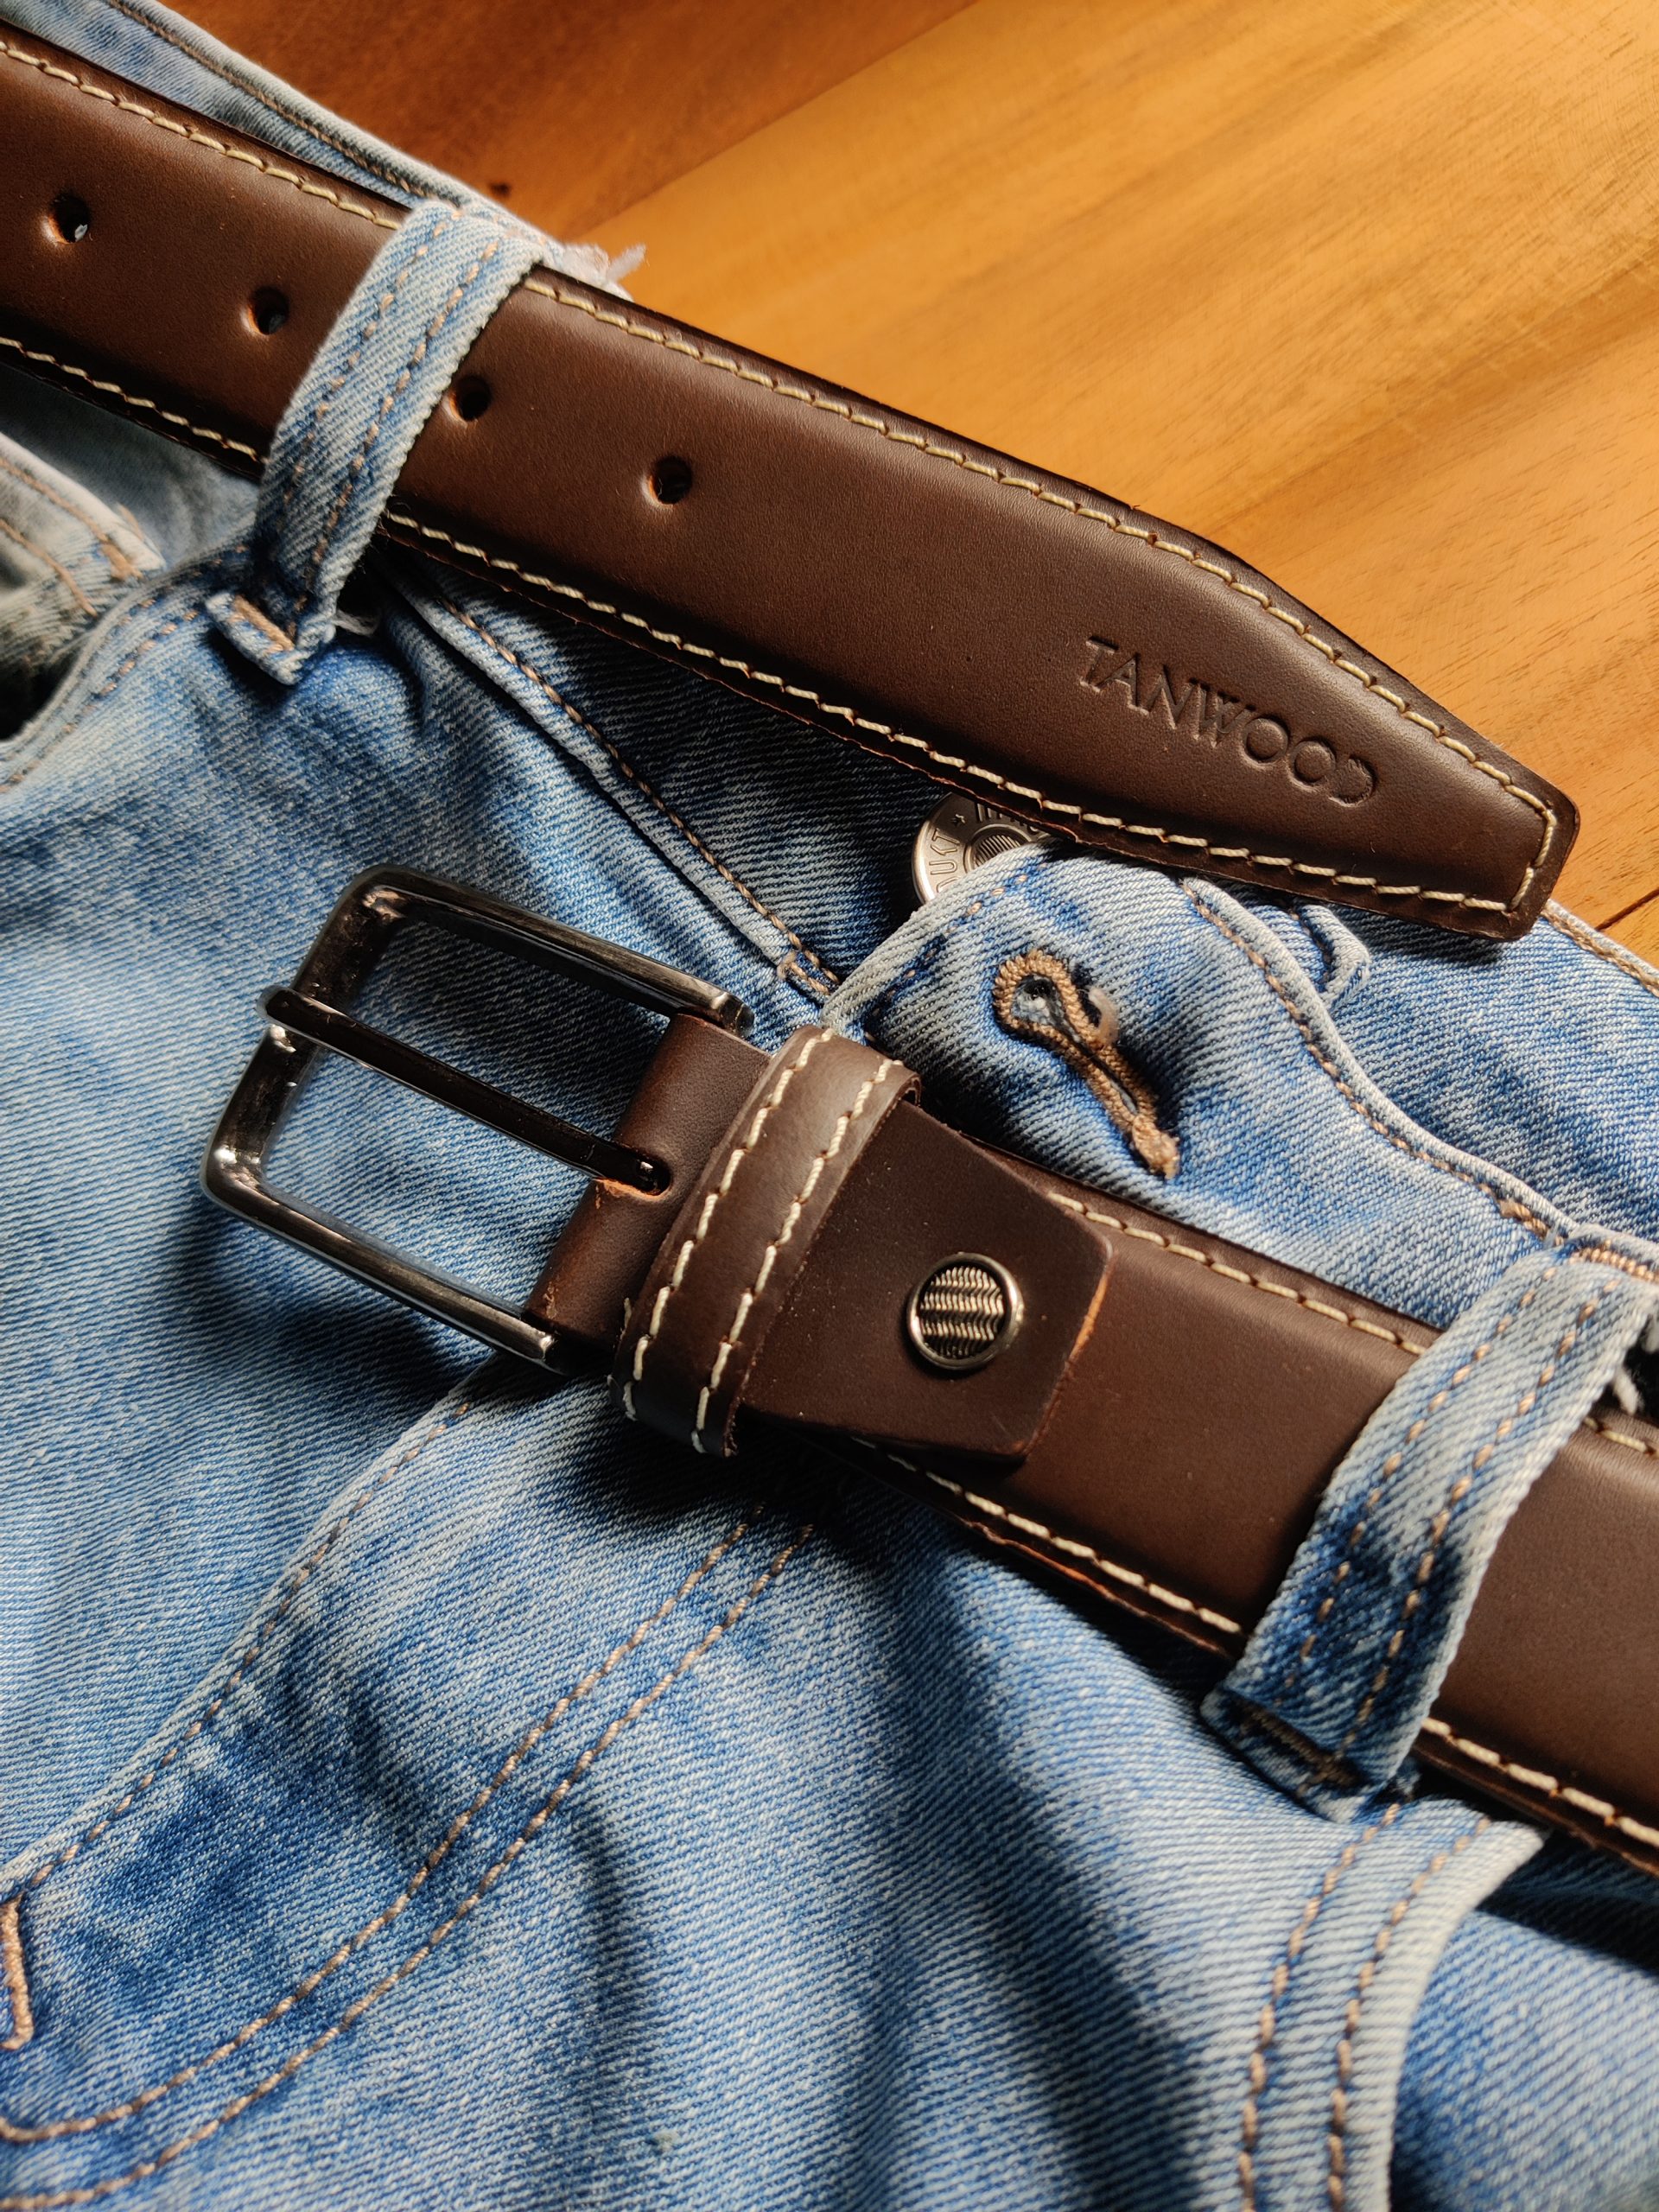 TANWOOD pure leather profile belts- brown shade - Tanwood Leather